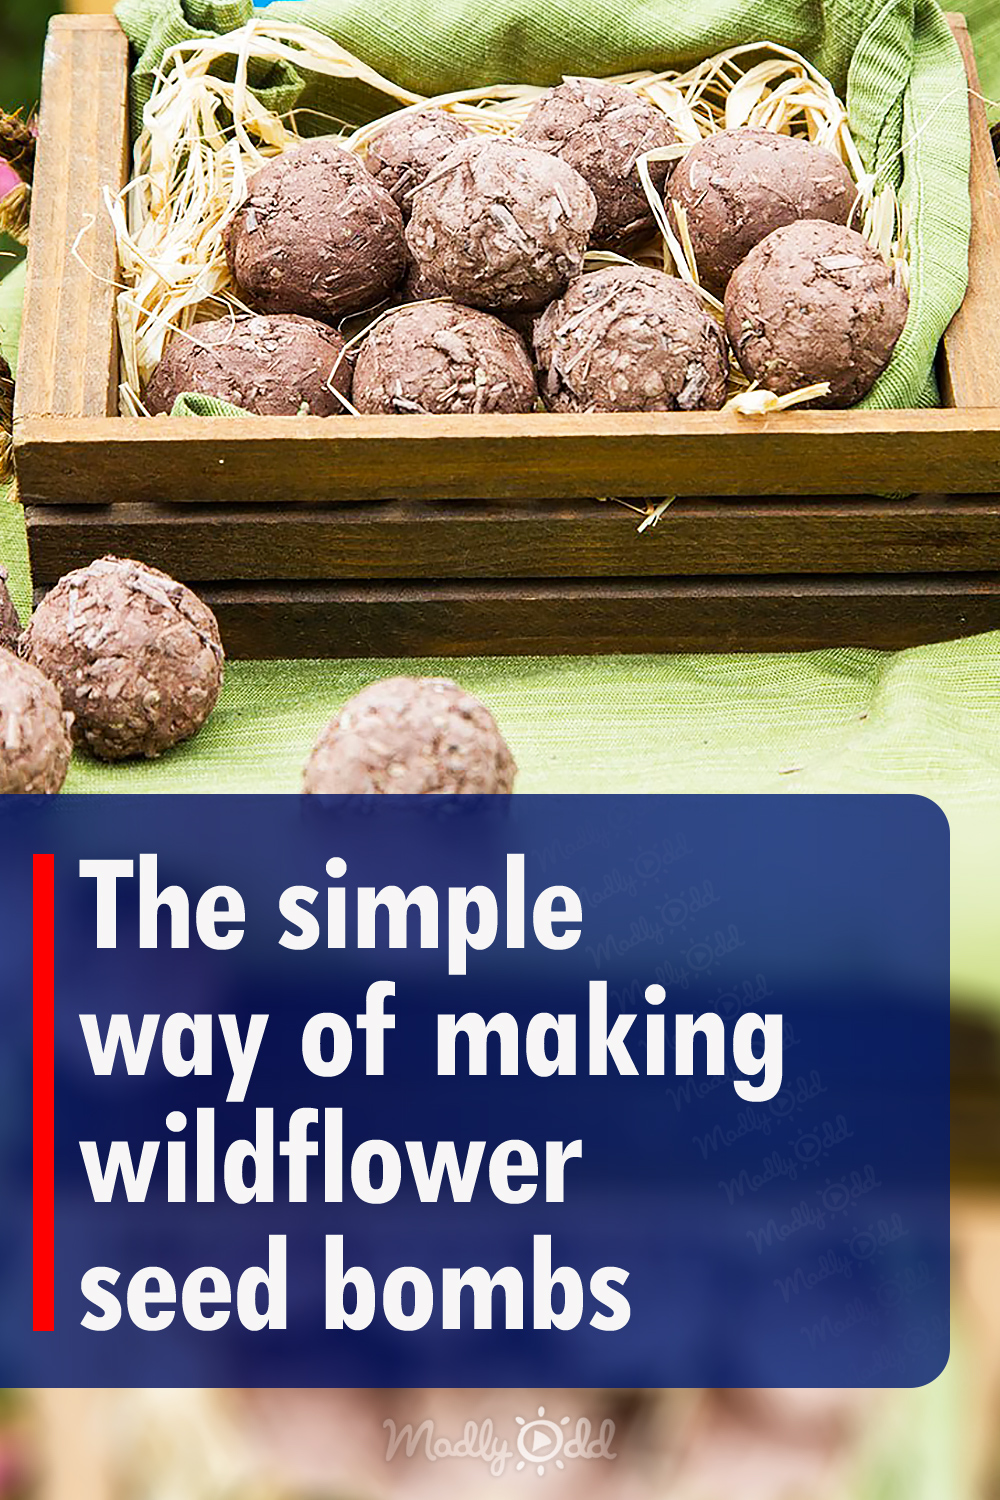 The simple way of making wildflower seed bombs